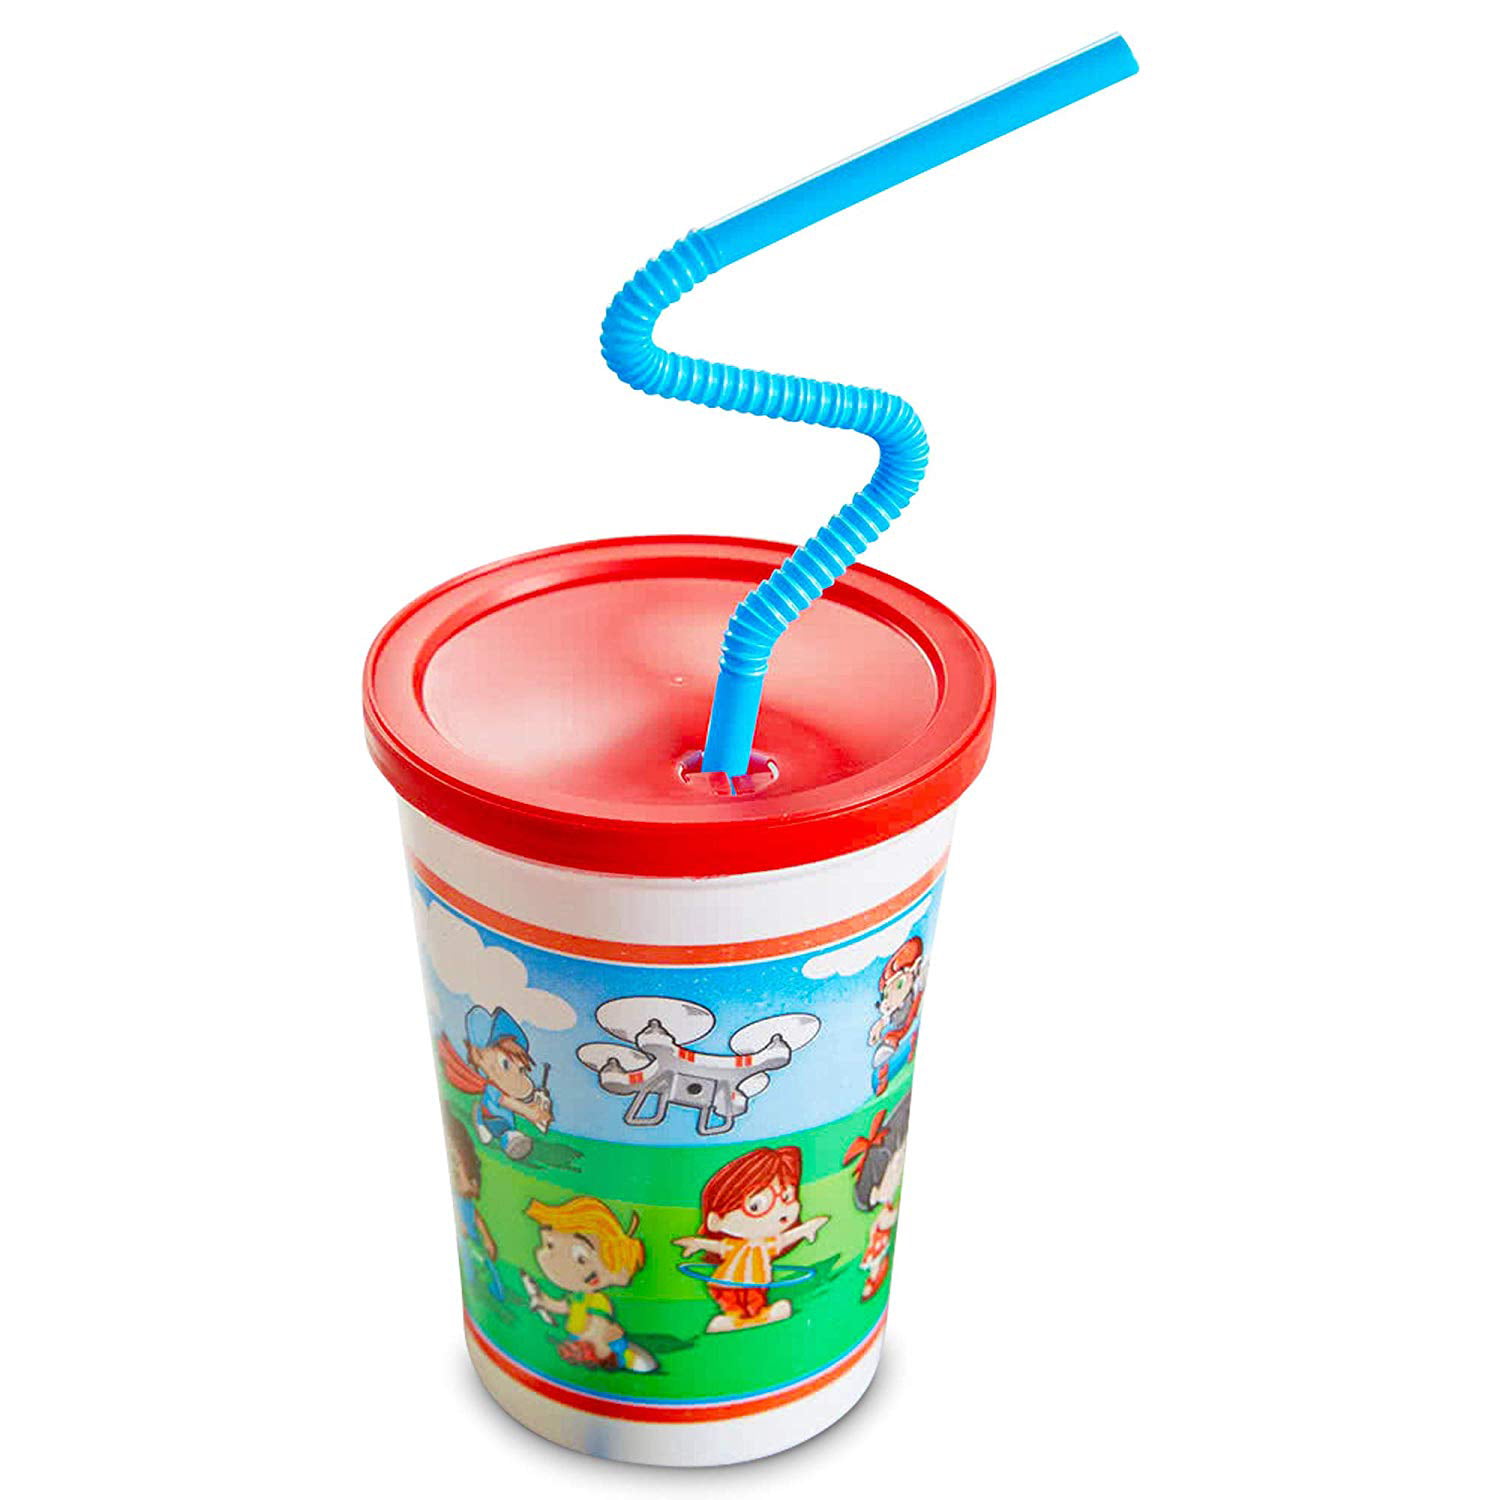 Kids cup. Clean Cup for Kids. Cup Design for child. The Final Straw for Kids.